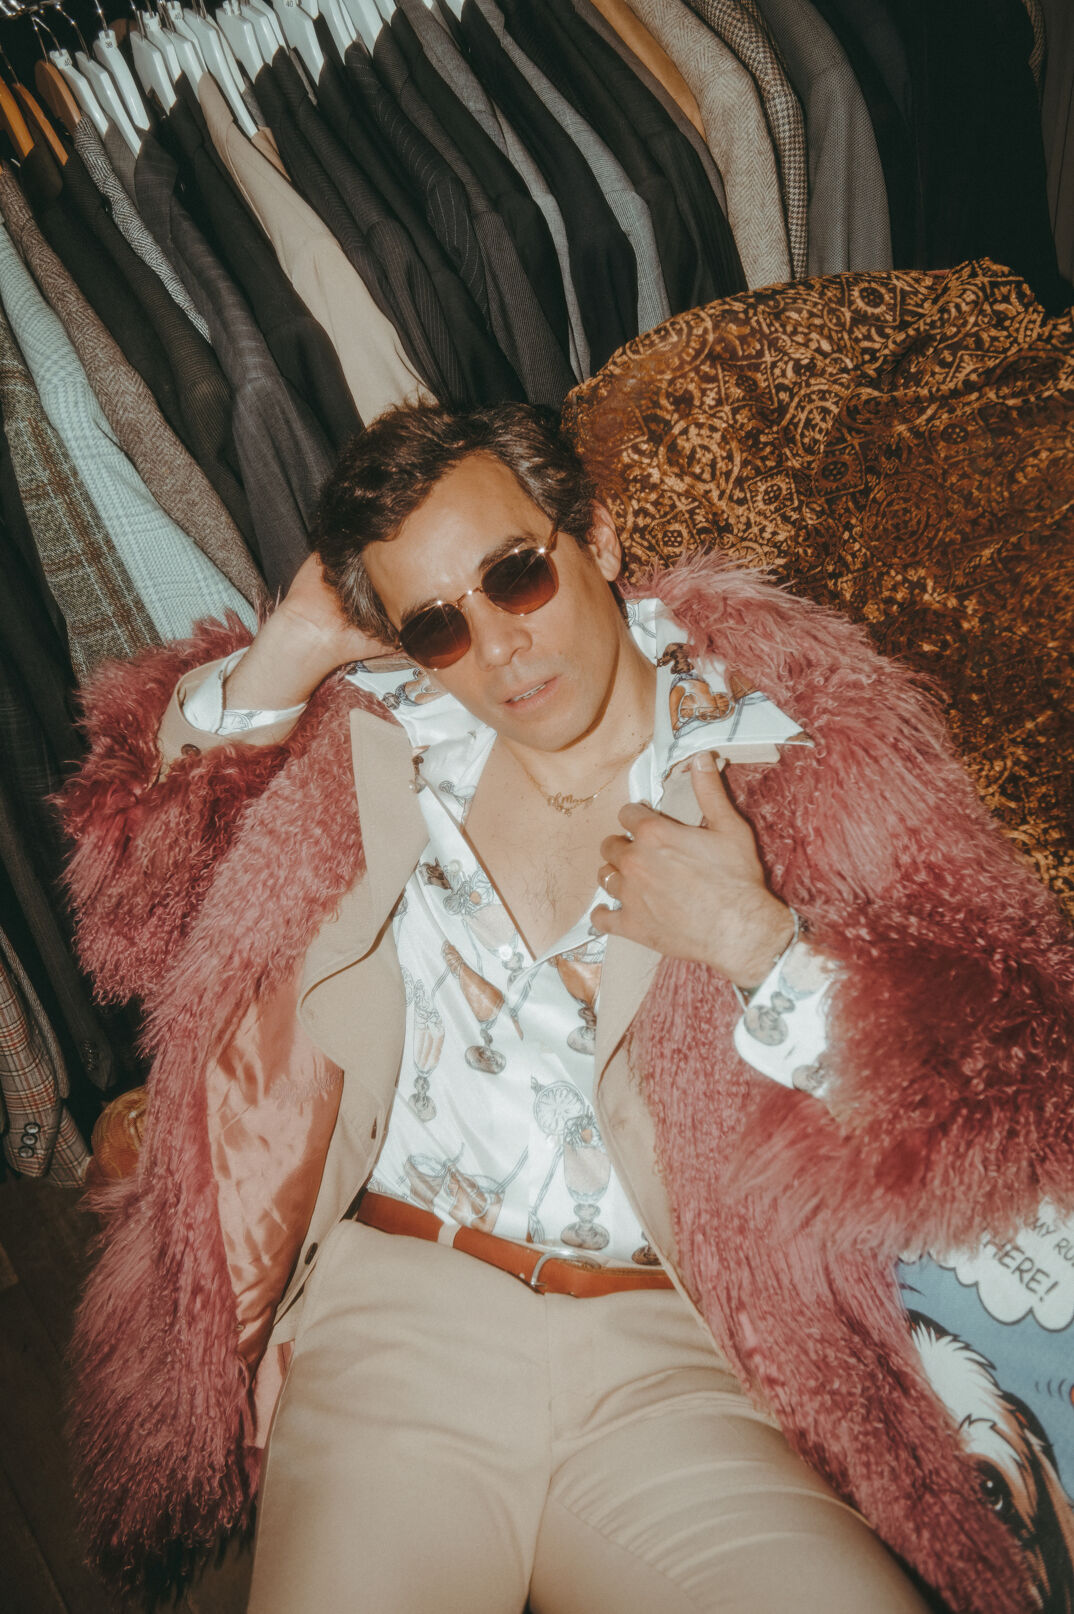 Conrad Ricamora wears sunglasses and a mohair jacket at a NYC vintage store.